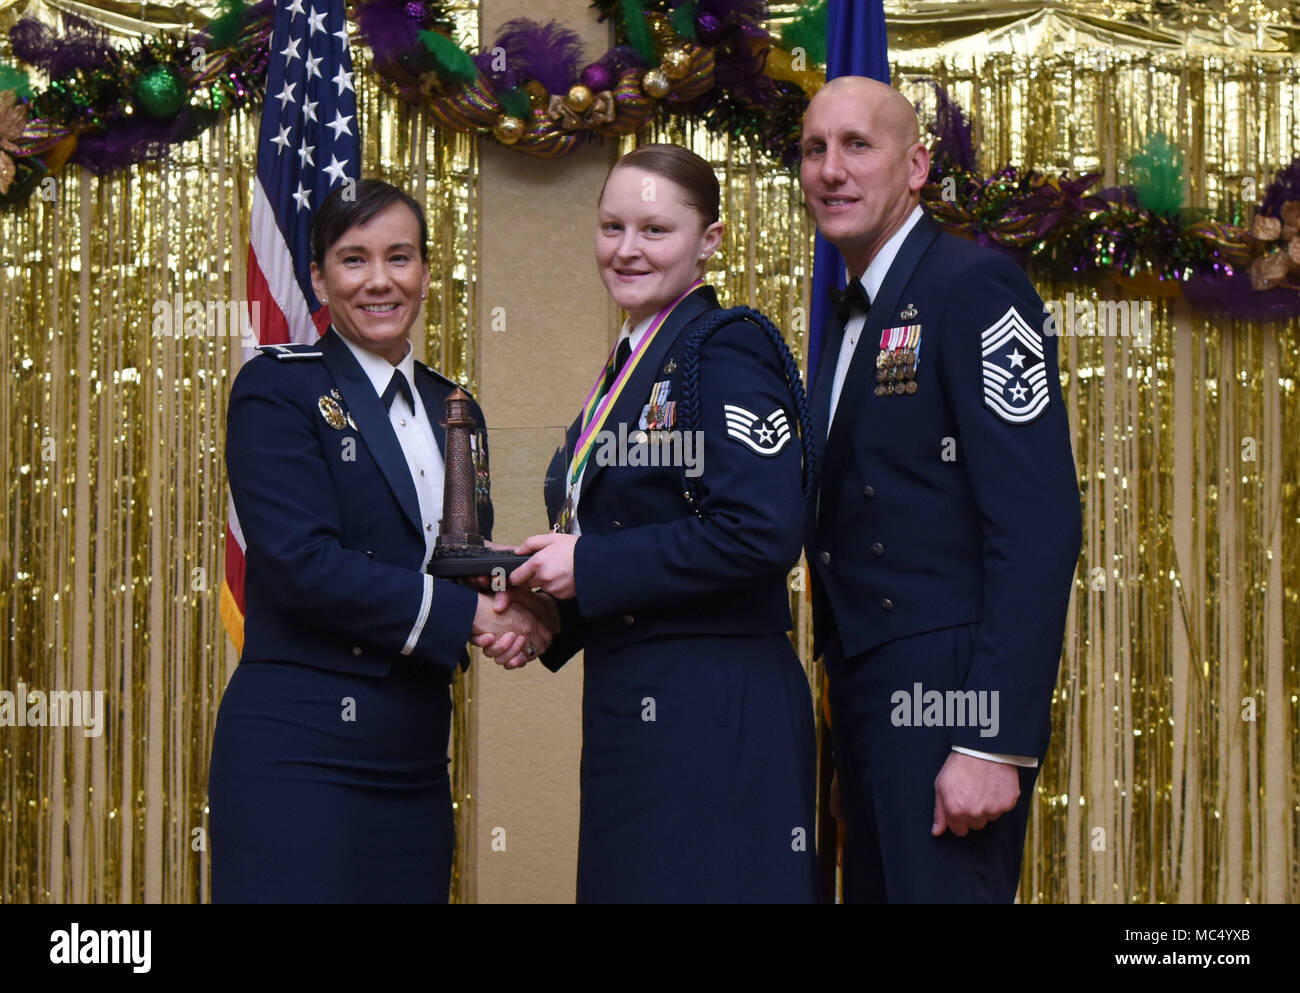 Col. Debra Lovette, 81st Training Wing commander, and Chief Master Sgt. Kenneth Carter, 81st TRW command chief, present Staff Sgt. Lauren Harris, 338th Training Squadron military training leader, with the Junior NCO Military Training Leader of the Year Annual Award during the 2017 Keesler Annual Awards Ceremony at the Bay Breeze Event Center Jan. 25, 2018, on Keesler Air Force Base, Mississippi. During the ceremony base leadership recognized outstanding Airmen and civilians from across the installation for their accomplishments throughout 2017. (U.S. Air Force photo by Kemberly Groue) Stock Photo